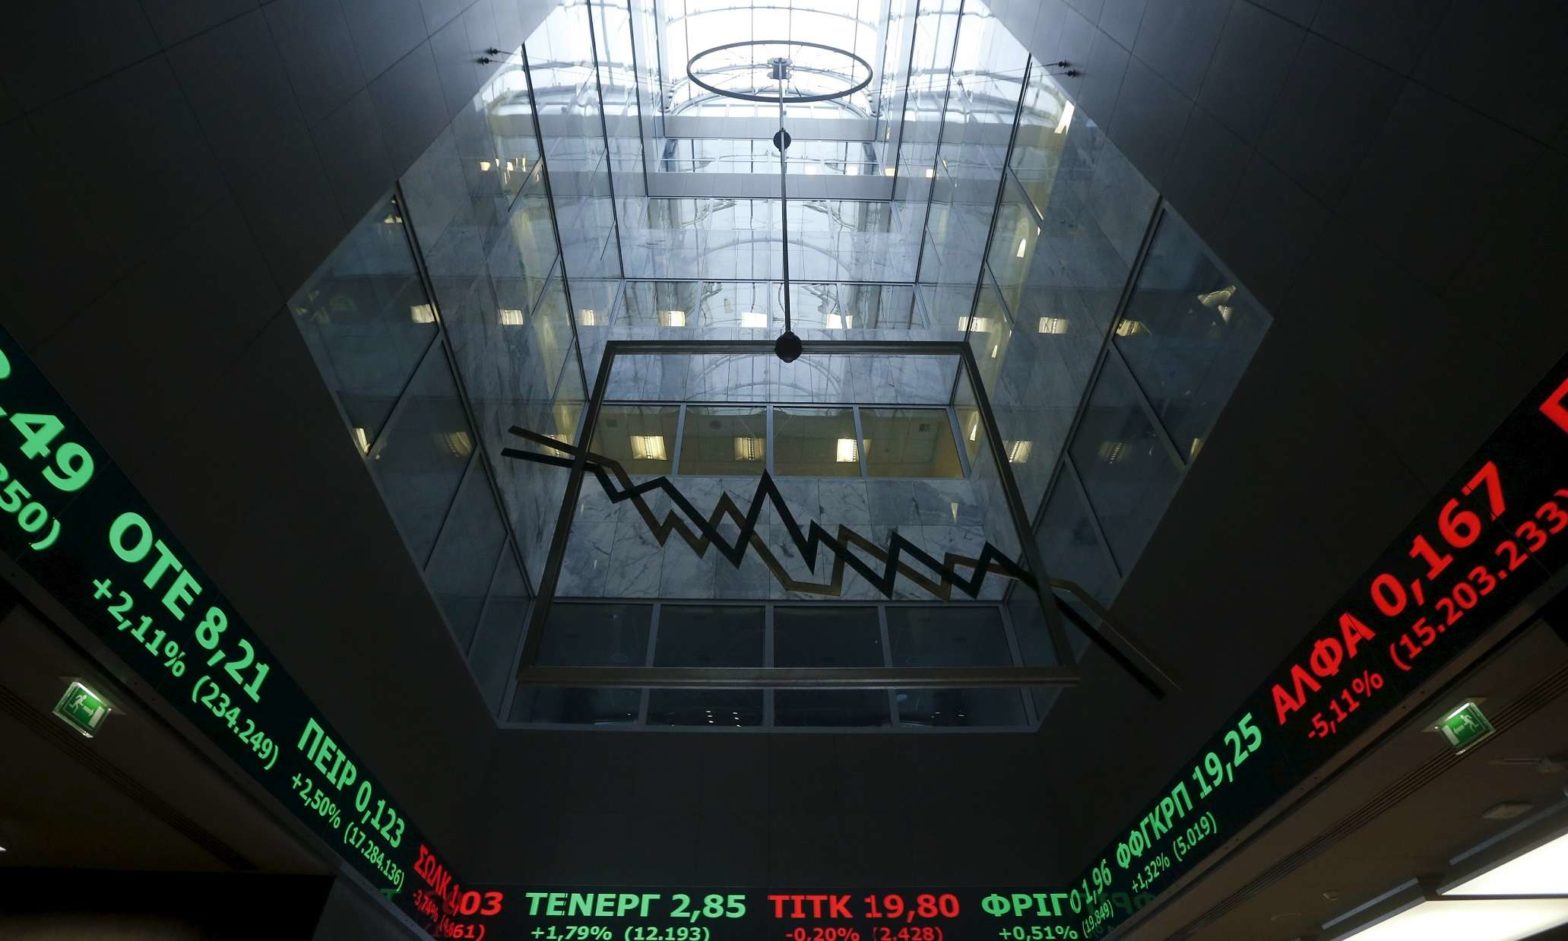 A stock ticker shows stock options inside the Athens stock exchange building in Athens